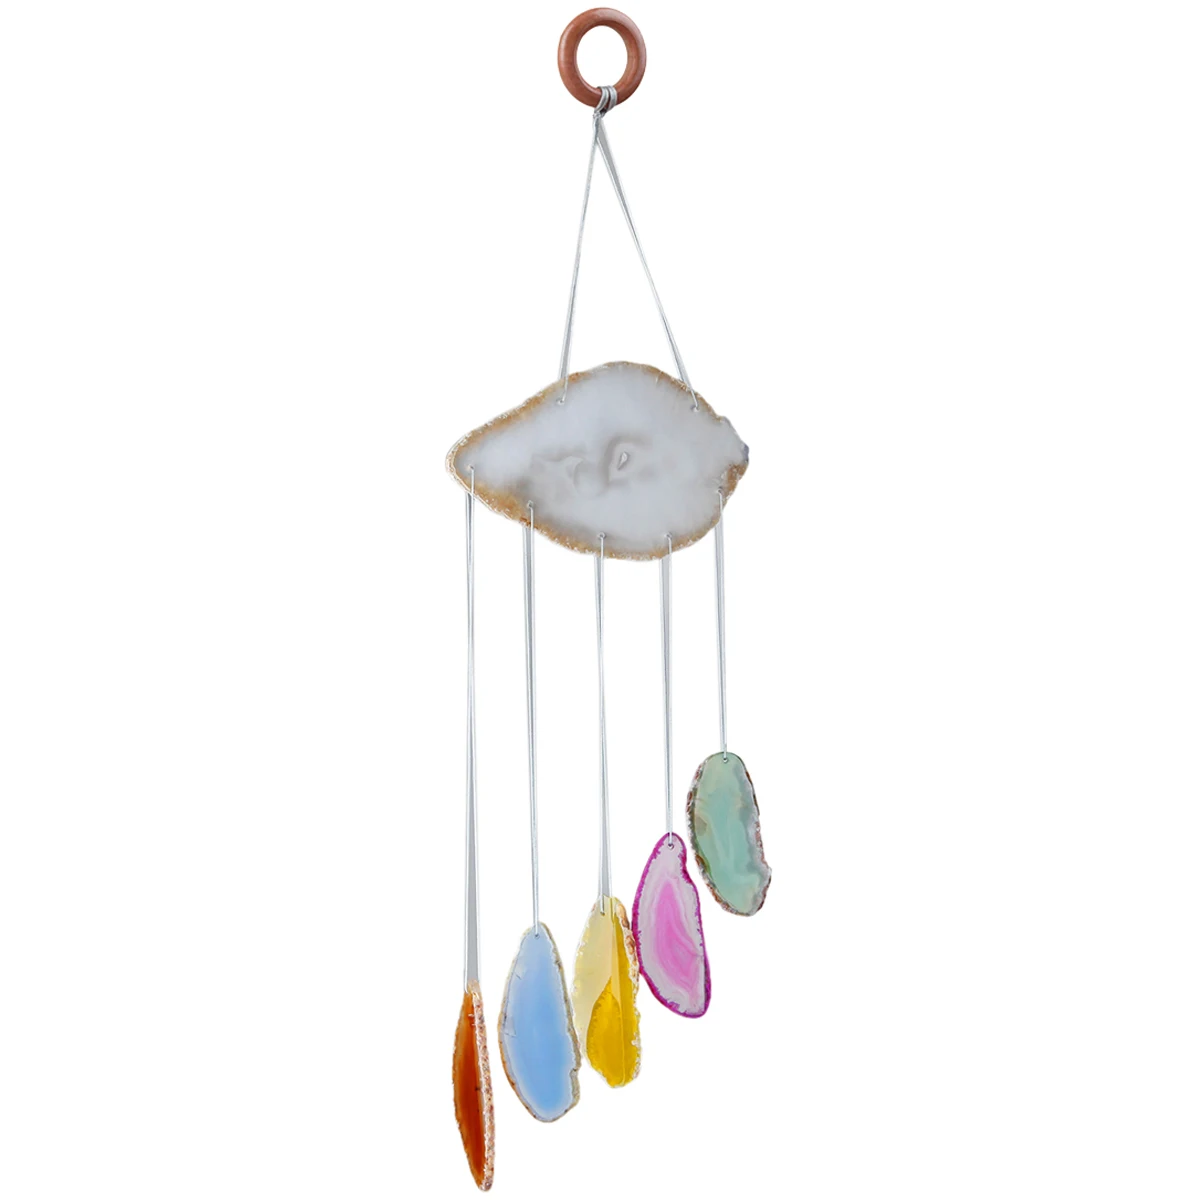 Natural Agate Slices Wind Chimes Handmade Wall Window Hanging Ornaments For Hoome Decoration natural agate slices wind chimes handmade wall window hanging ornaments for hoome decoration